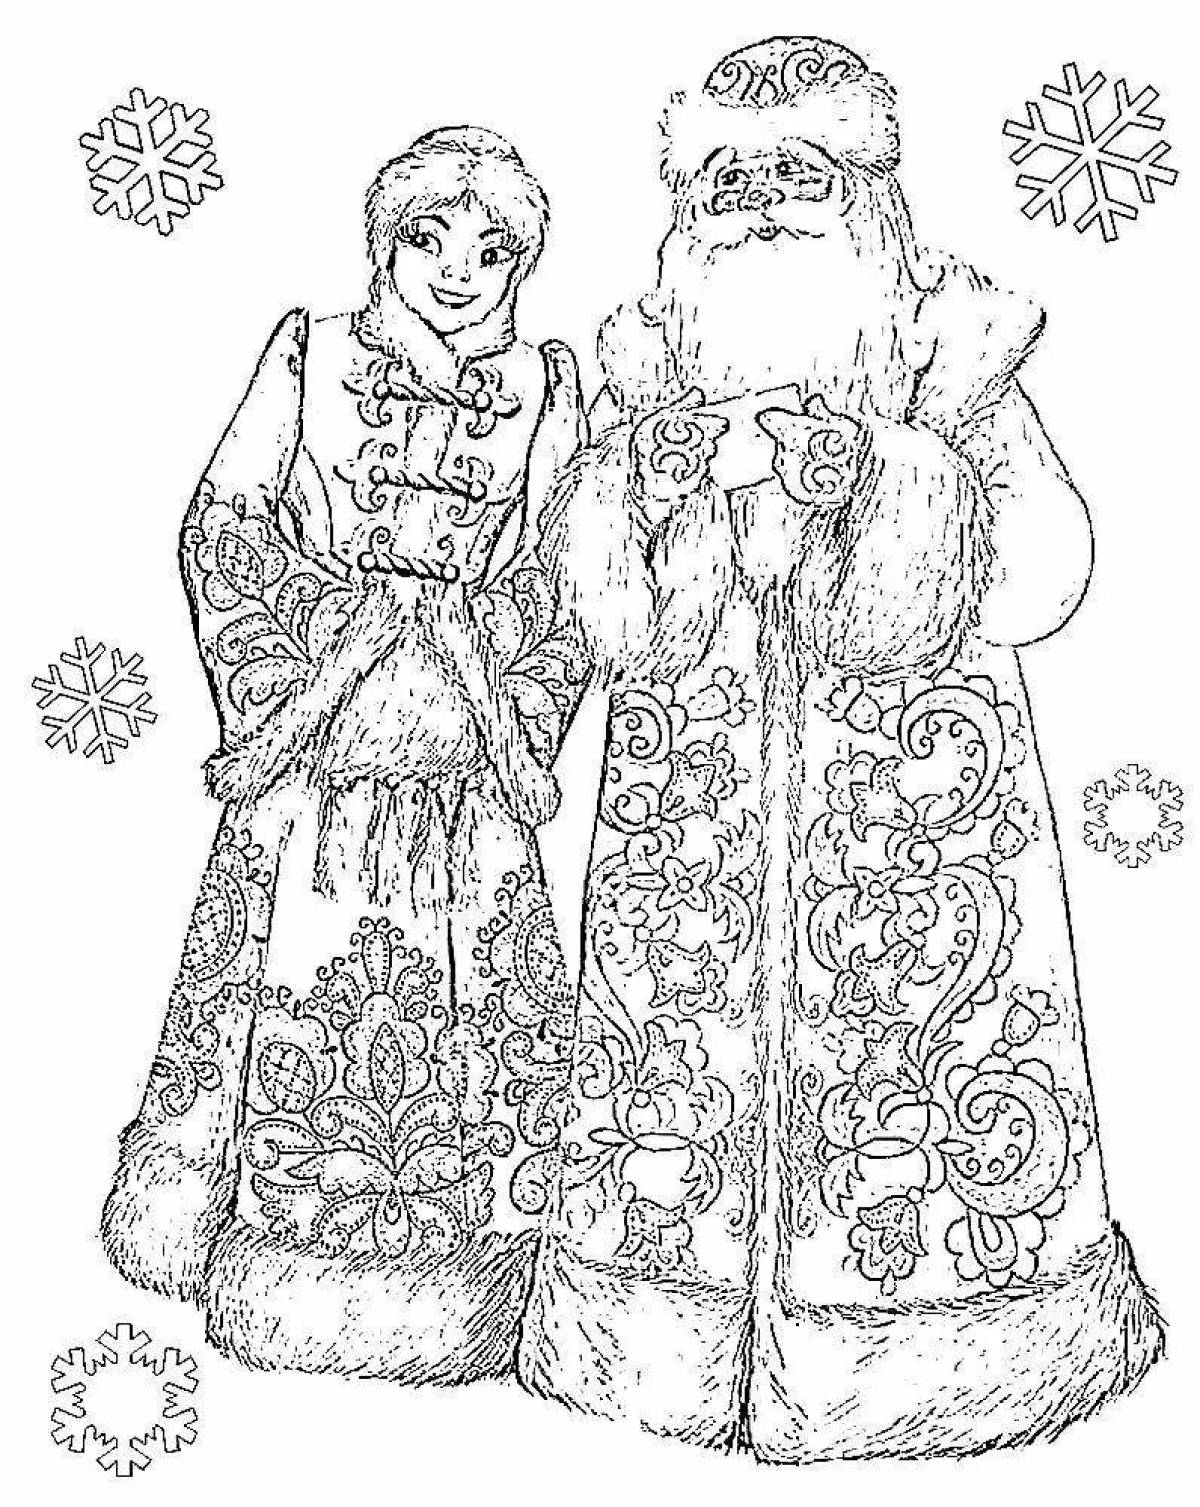 Santa Claus and Snow Maiden pictures #4